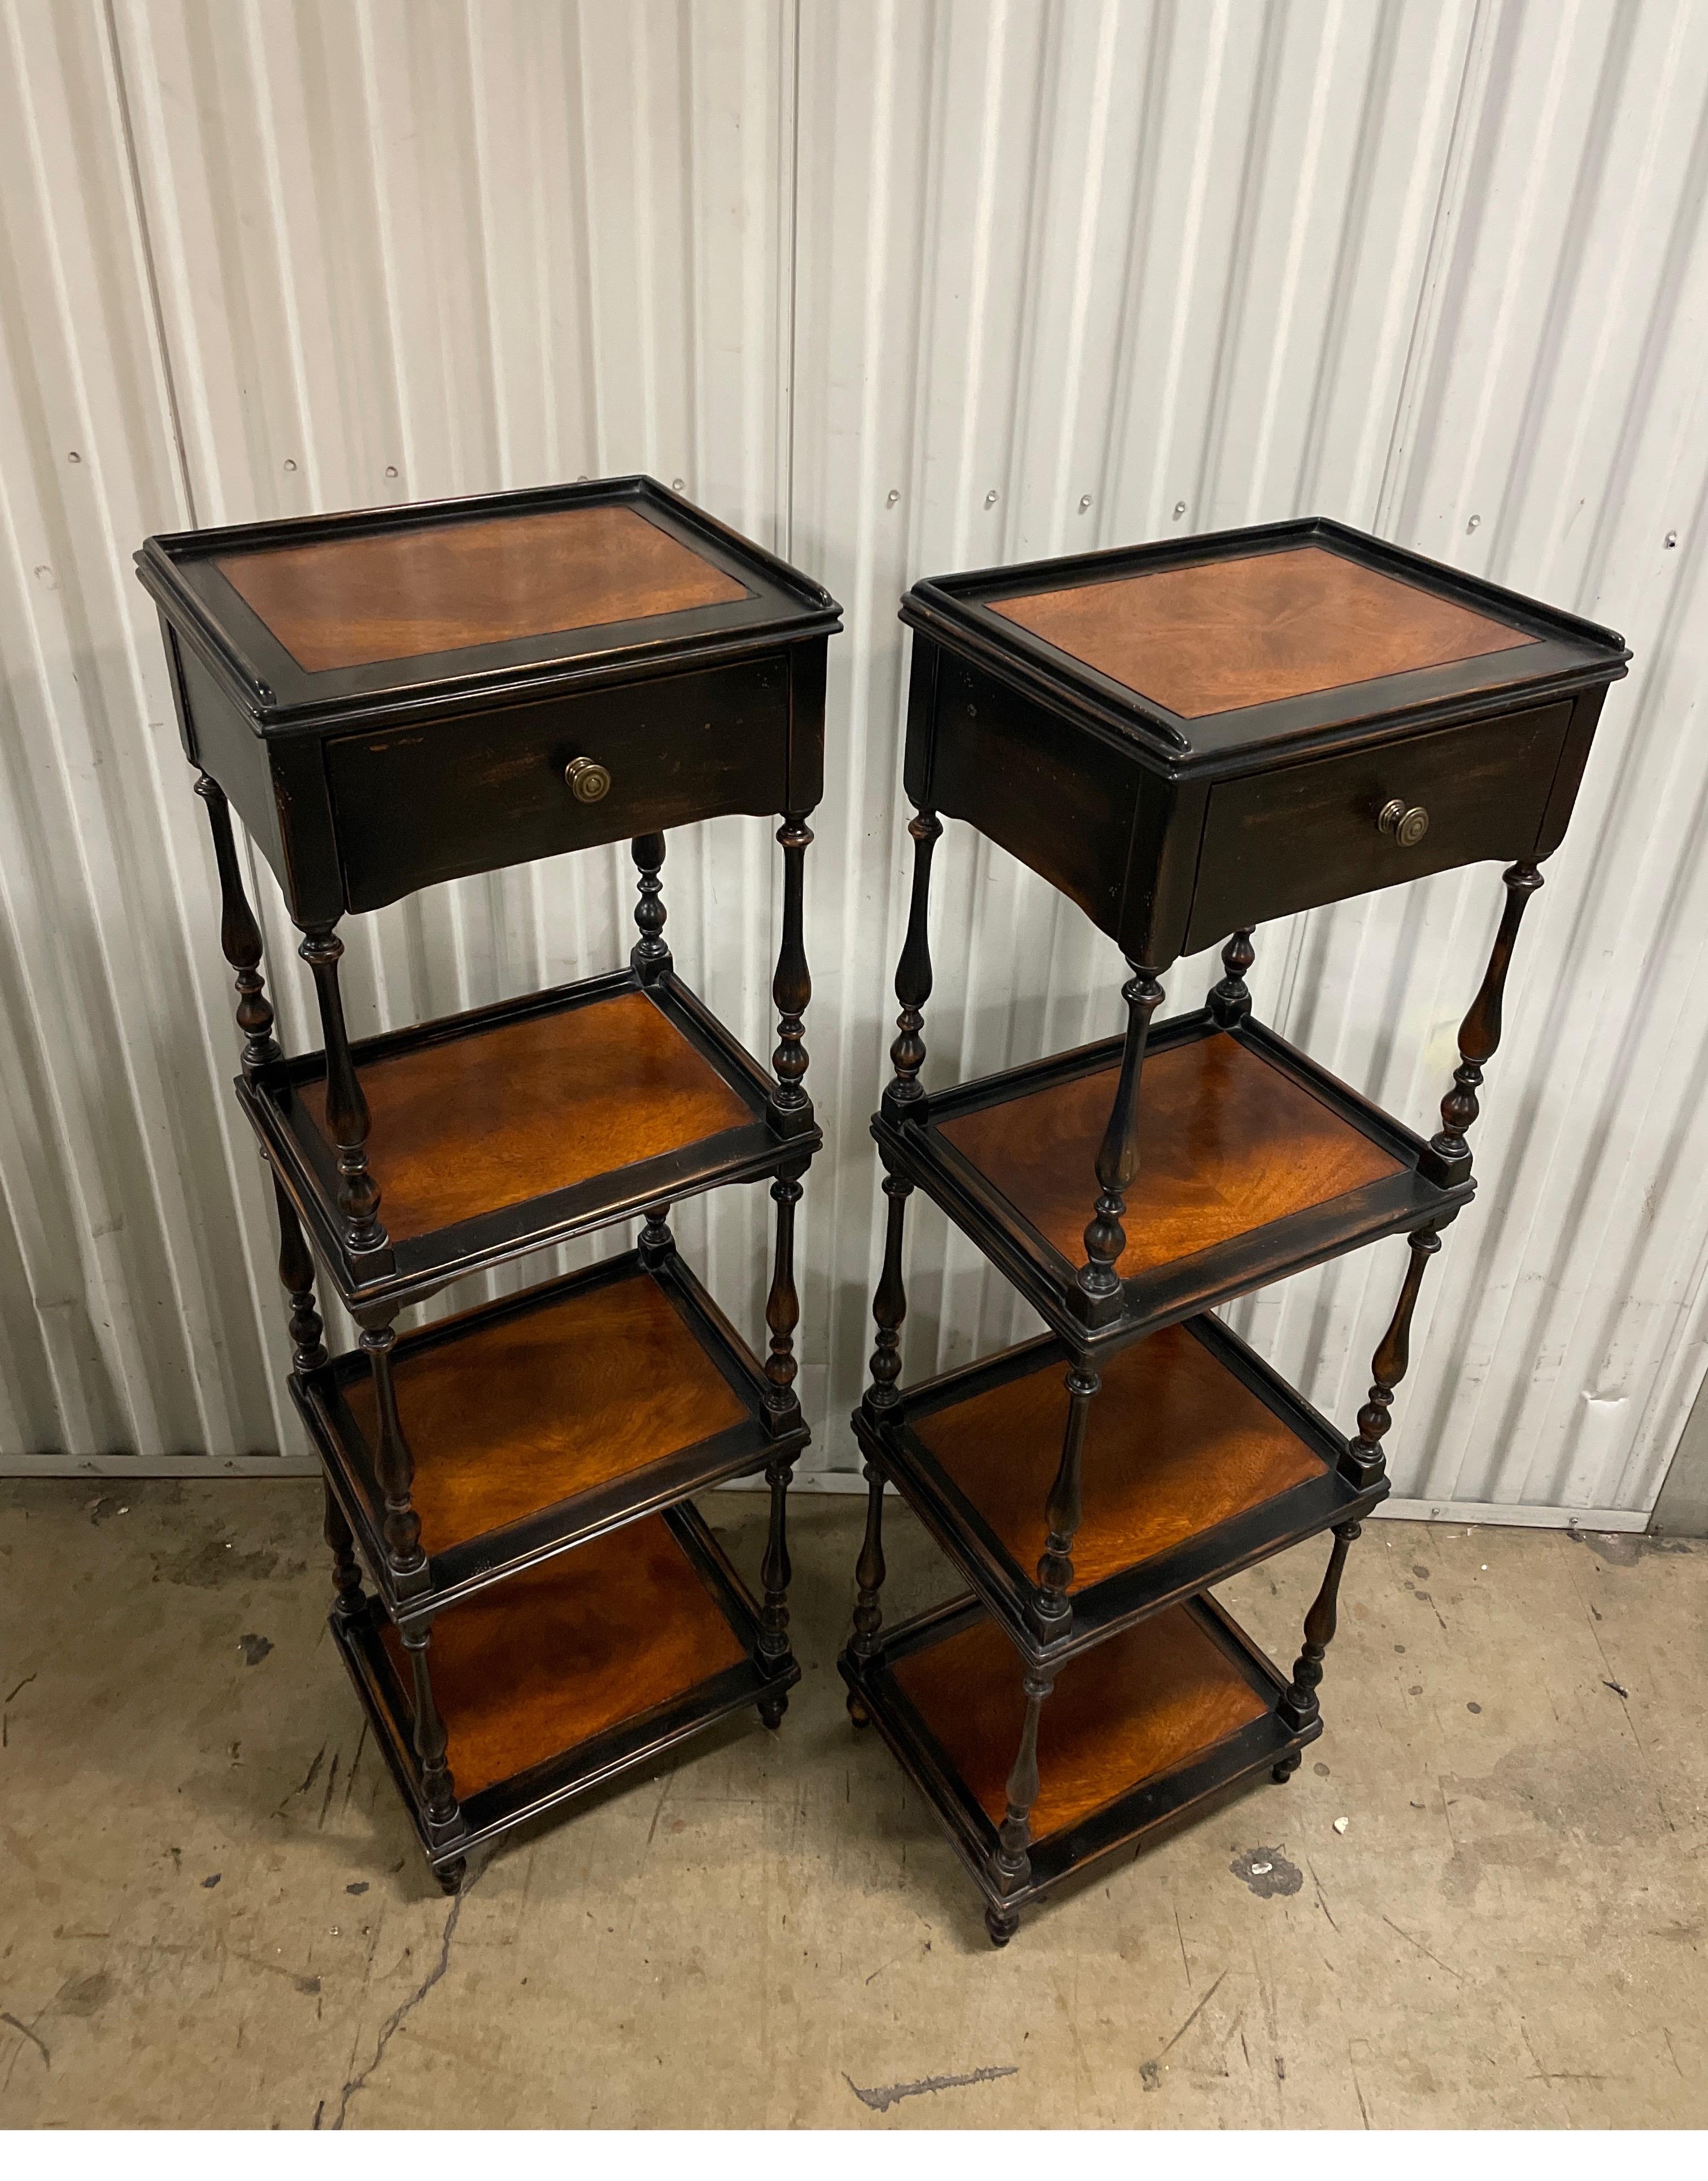 Vintage pair of etageres / bookcases with three shelves below a top drawer.